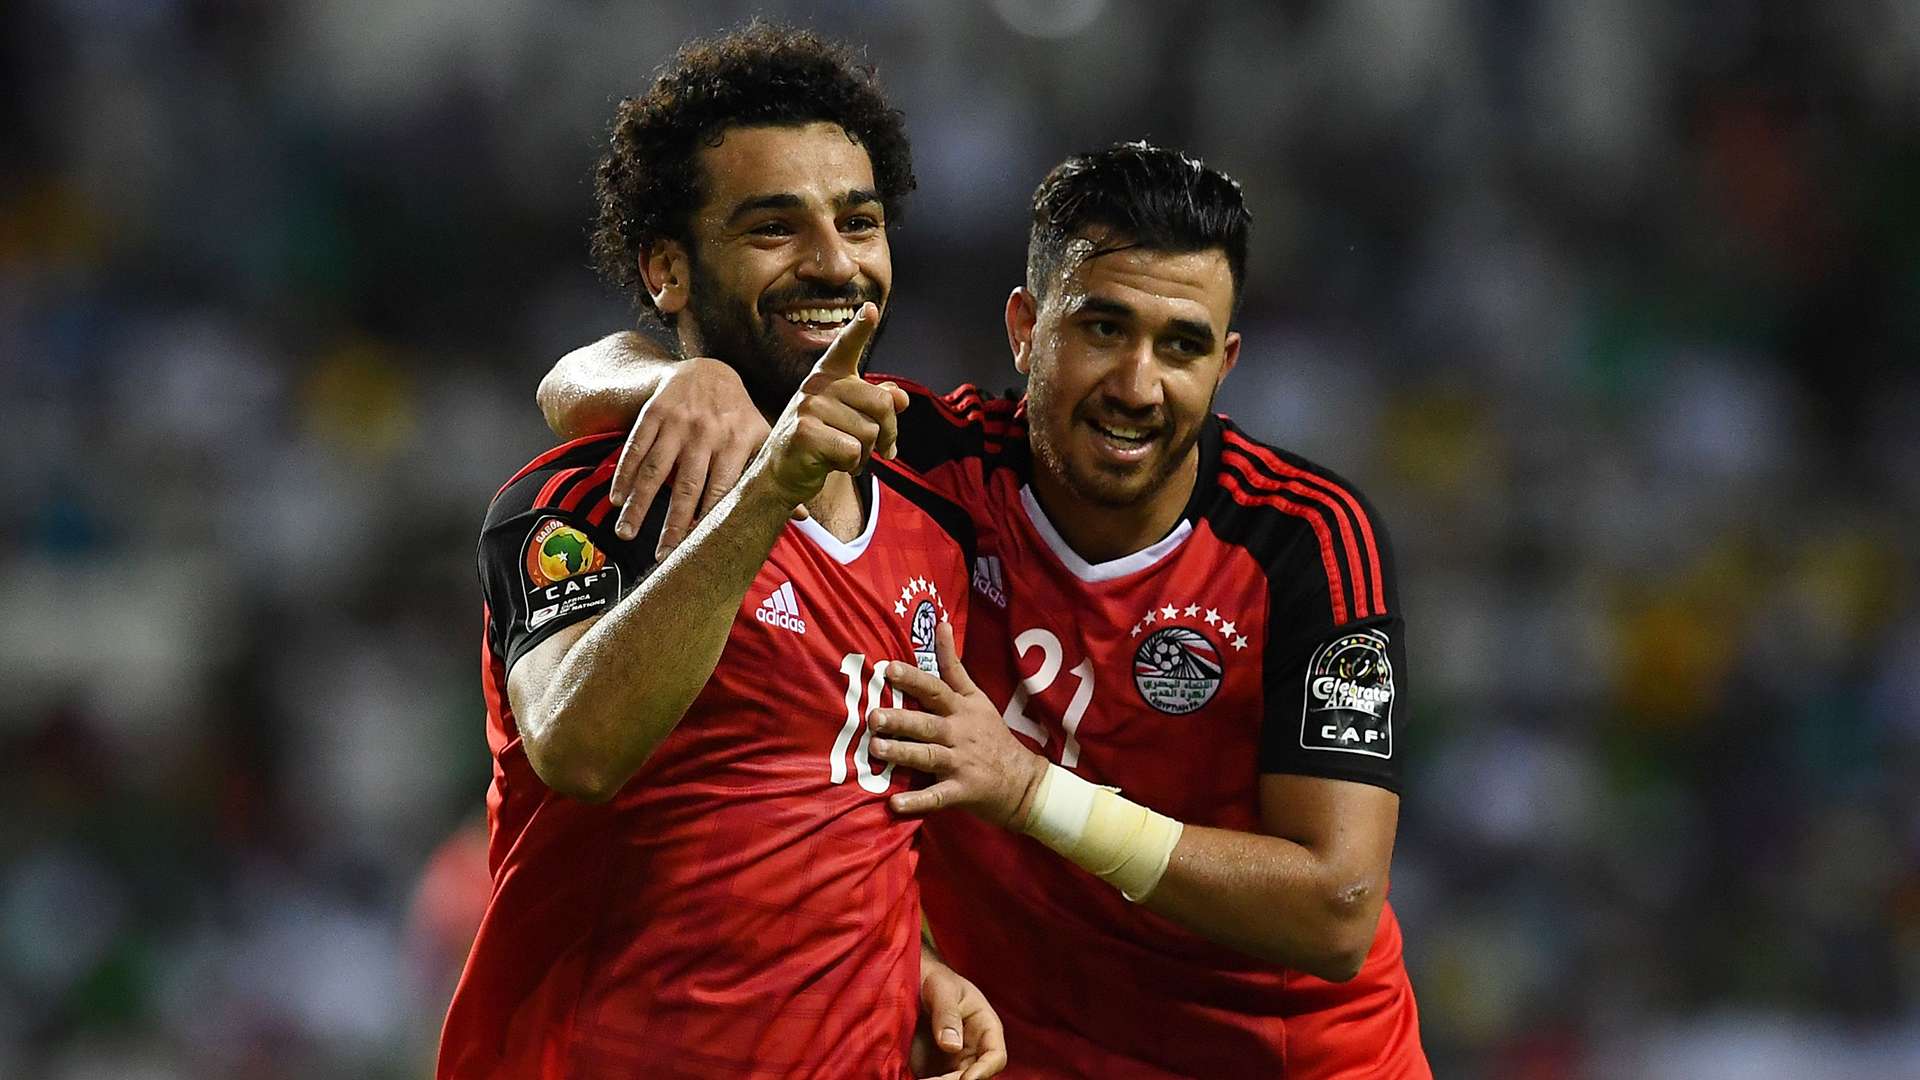 Mohamed Salah Egypt Africa Cup of Nations 2017